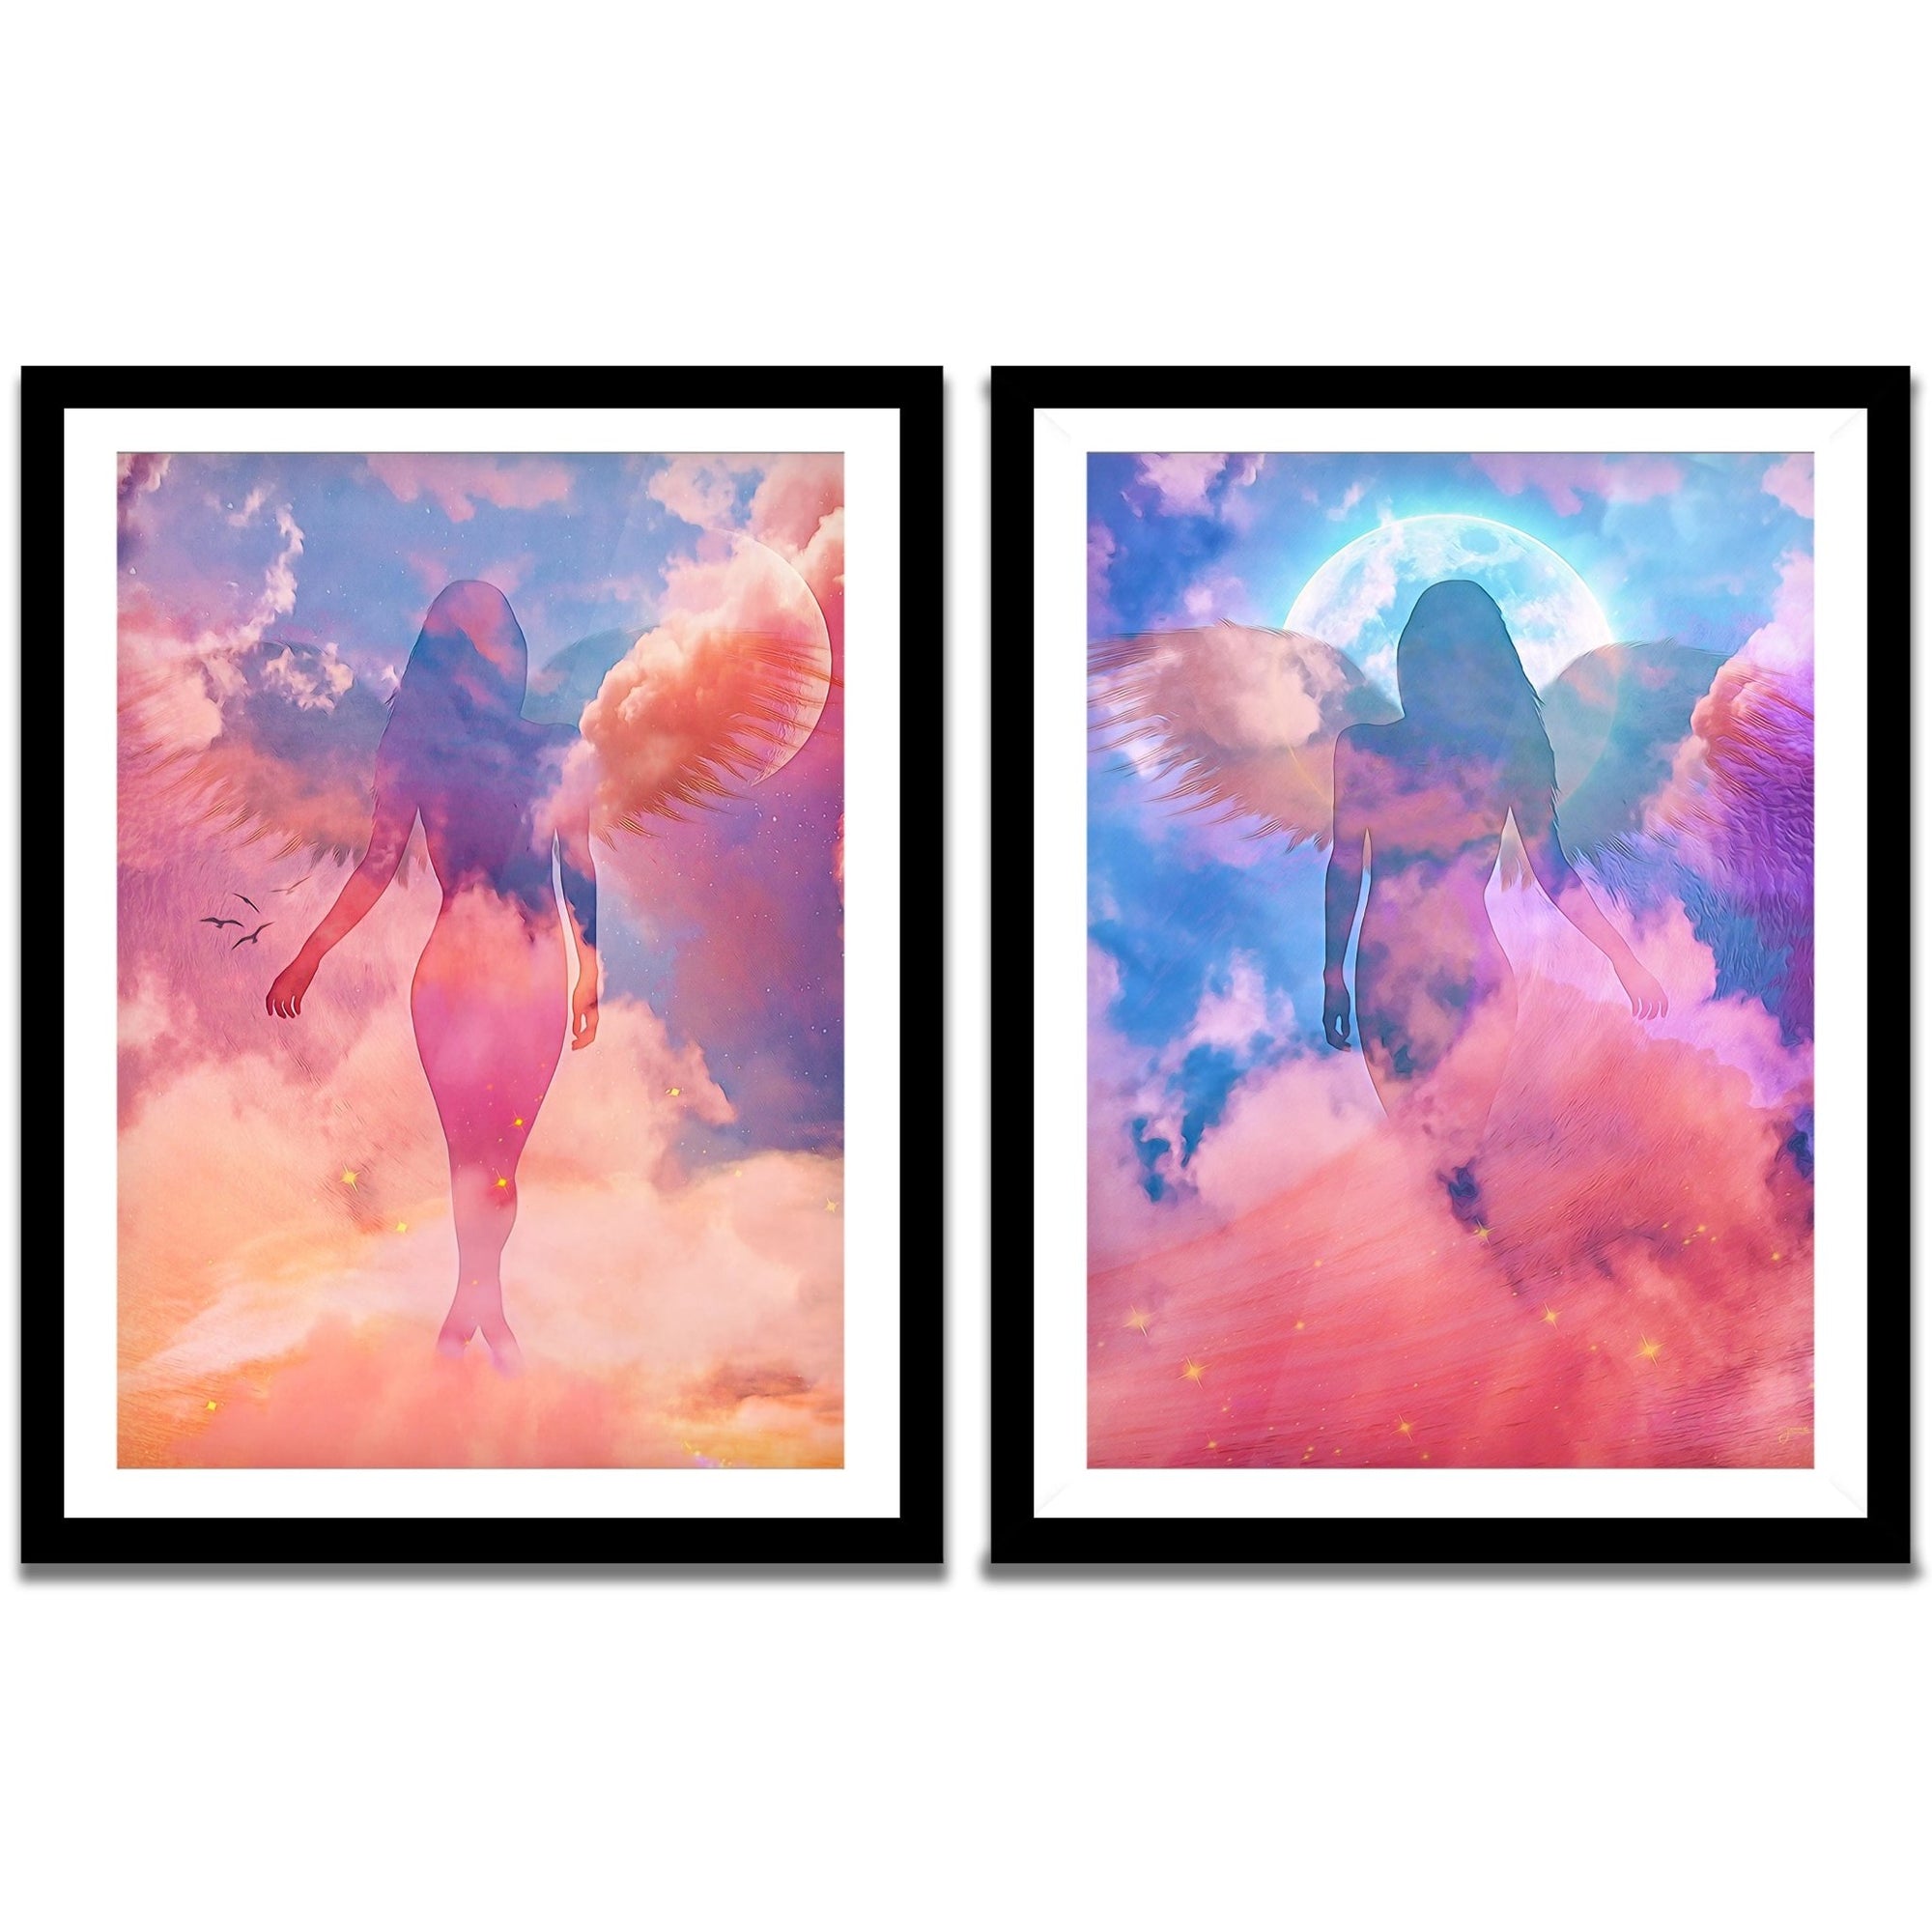 An Angel's Reflection Semi-Gloss Prints - Thedopeart Prints